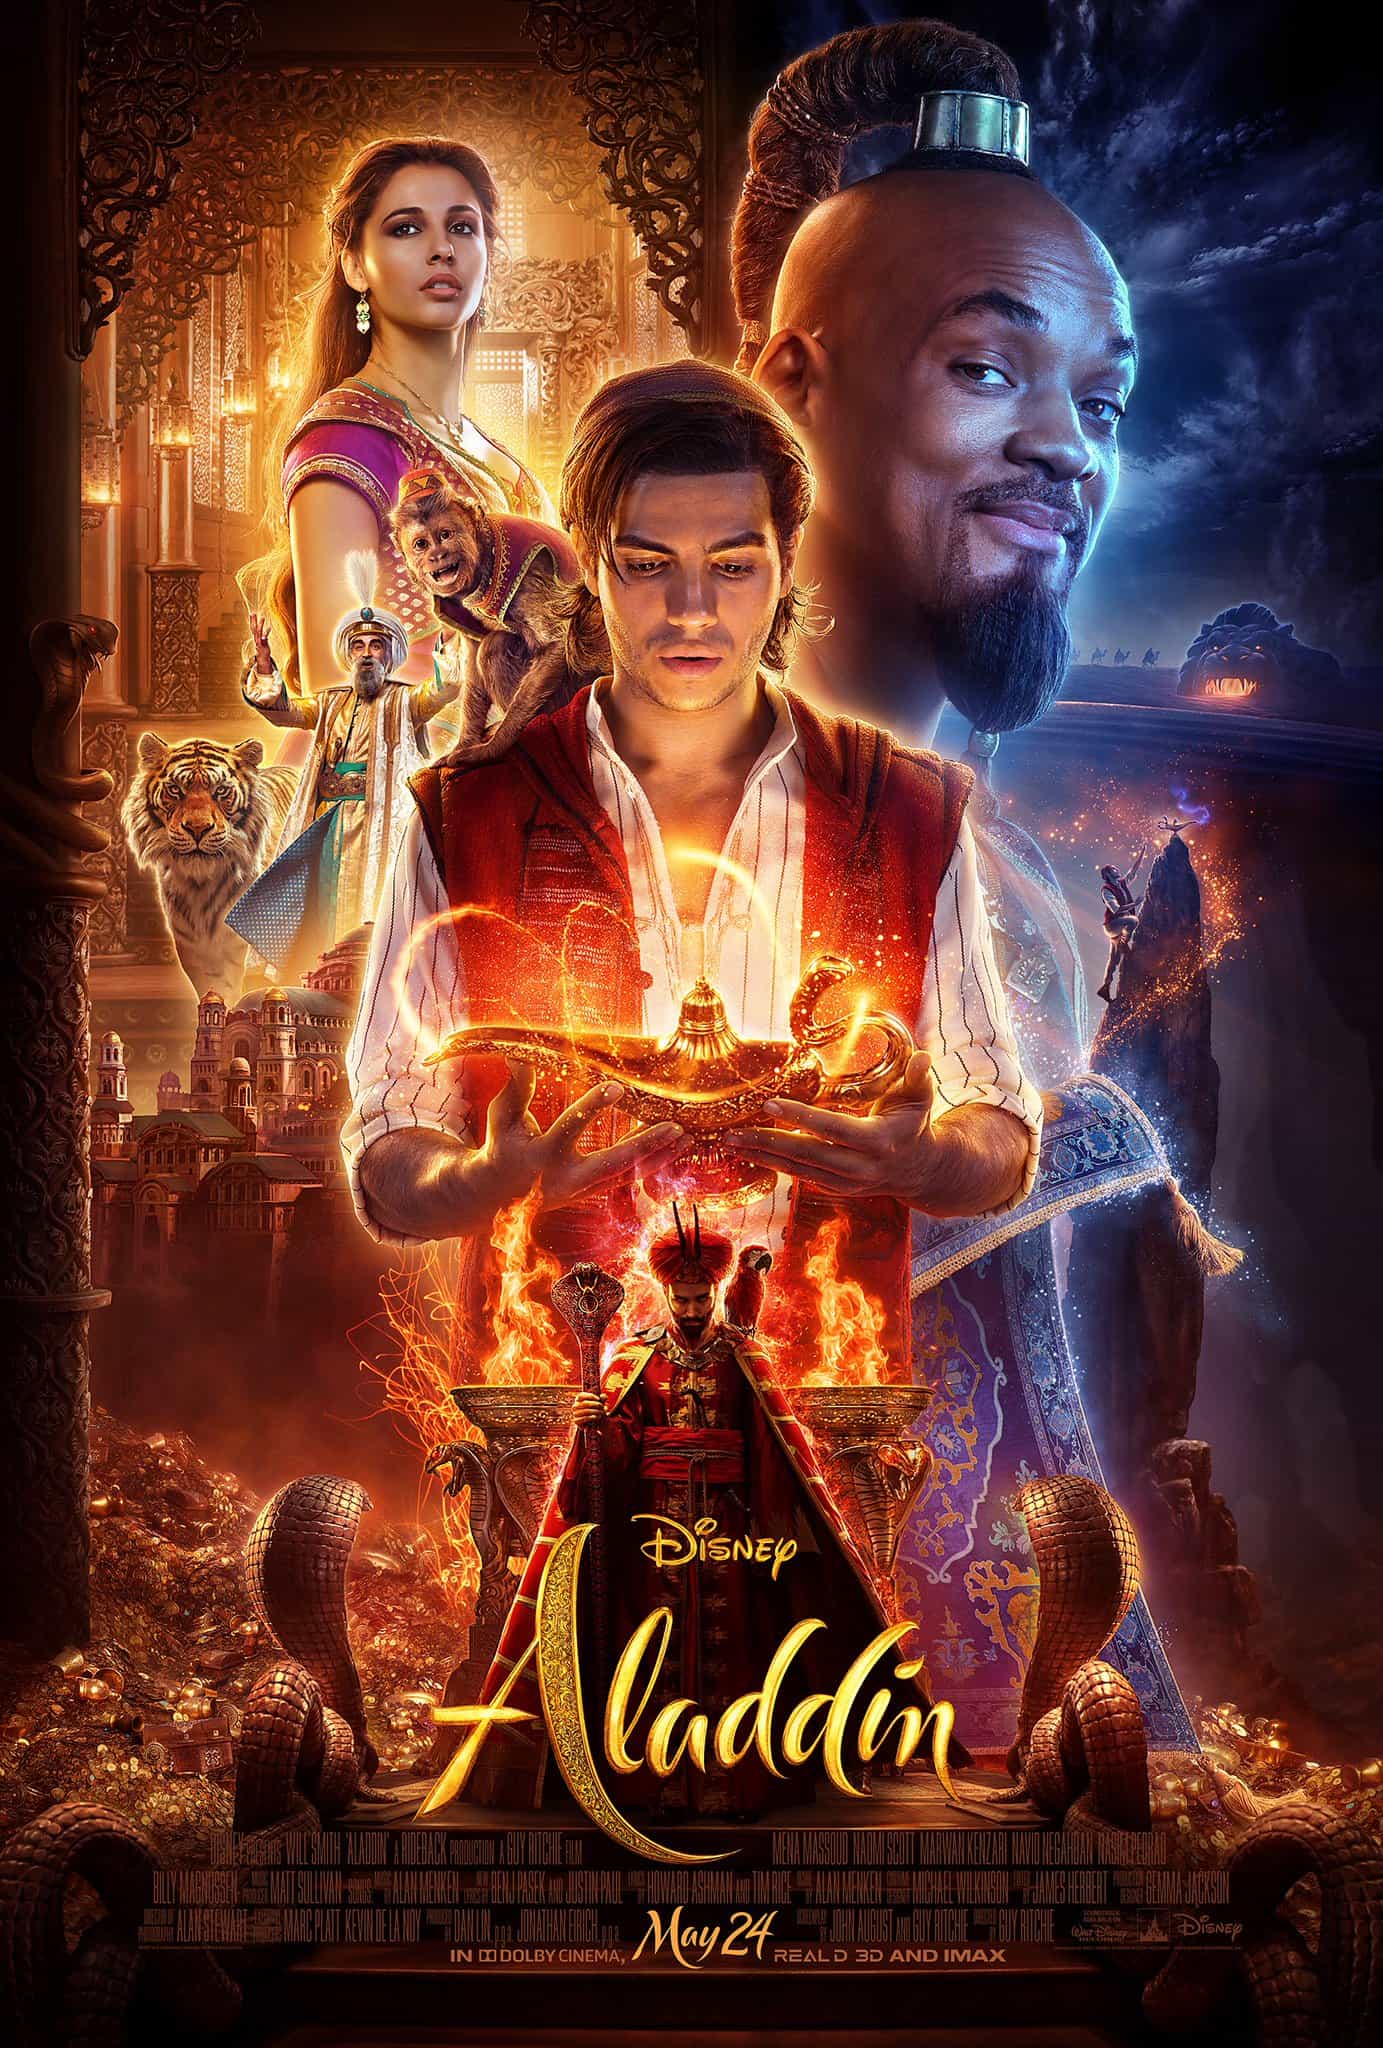 World Box Office Analysis 24th - 26th May 2019:  Live action Aladdin soars to the top of the box office on its debut weekend